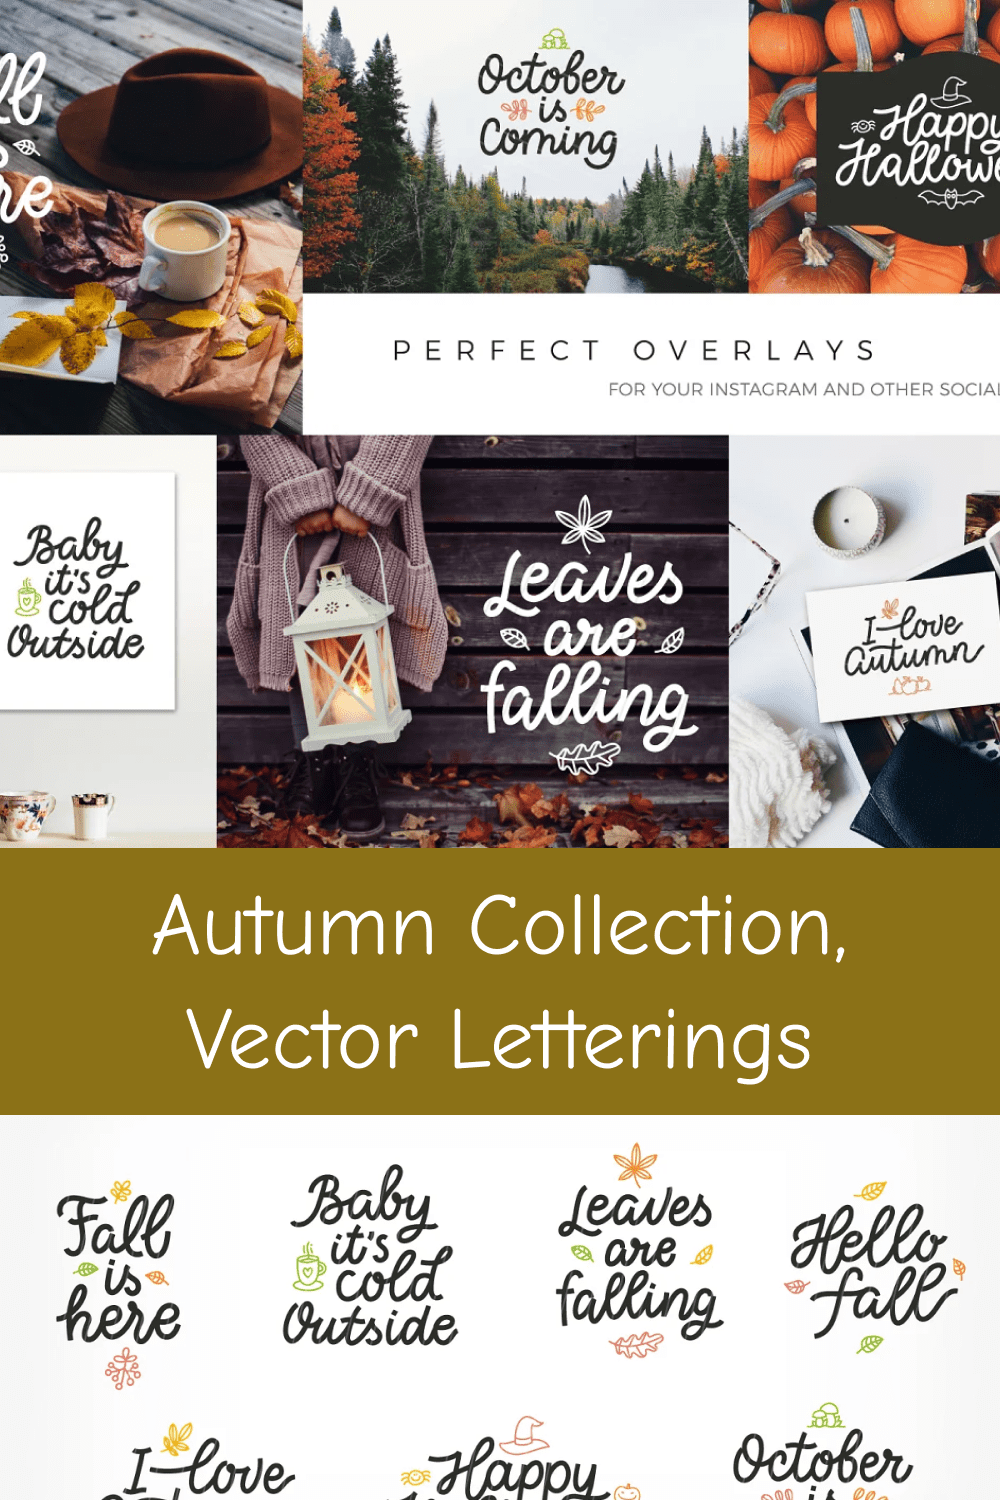 Autumn Collection, Vector Letterings.